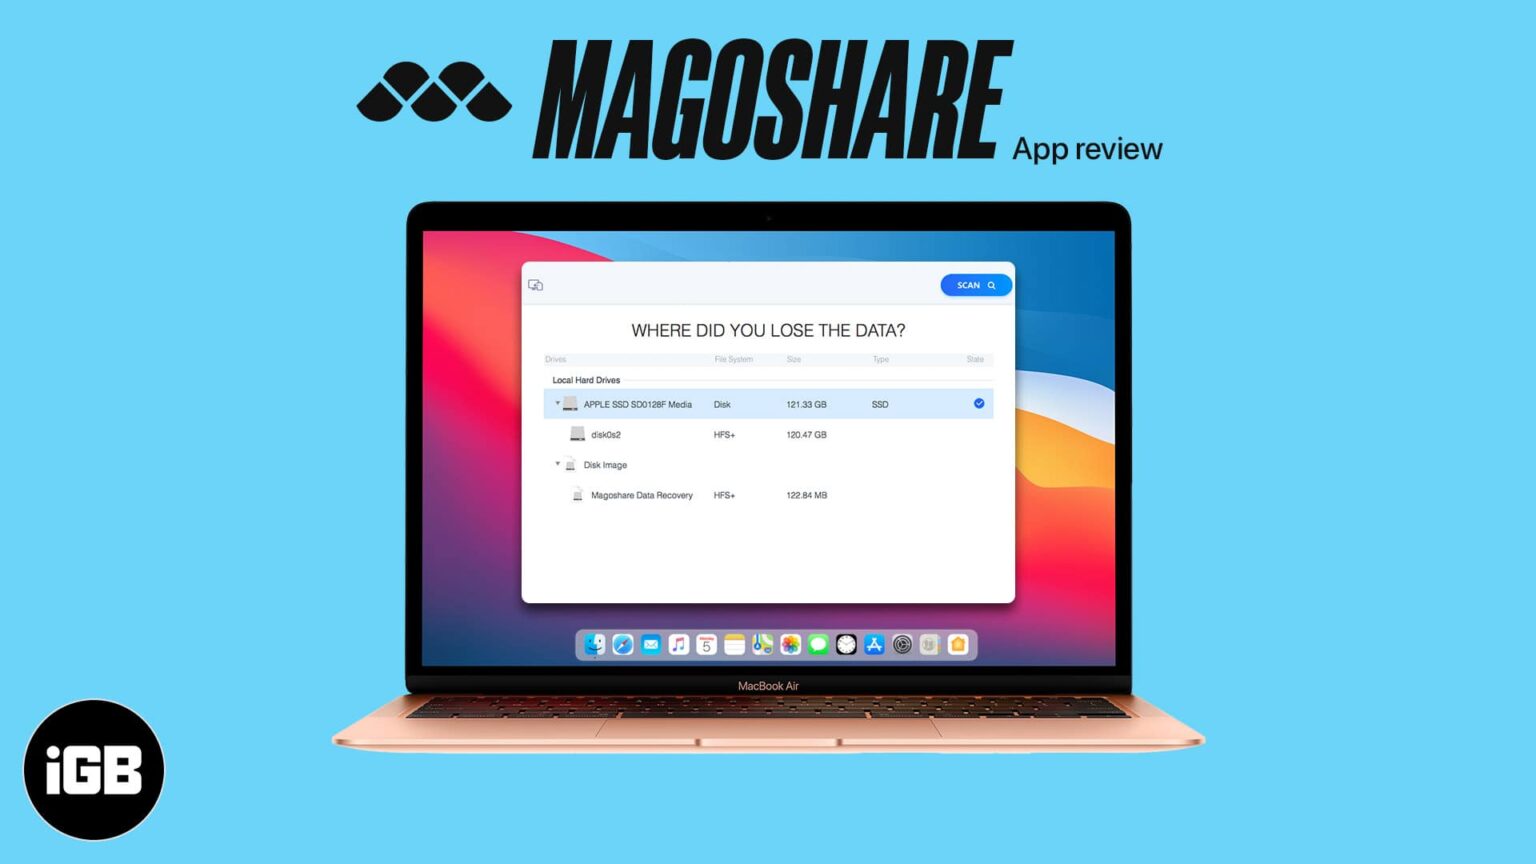 Magoshare AweClone Enterprise 2.9 for android instal